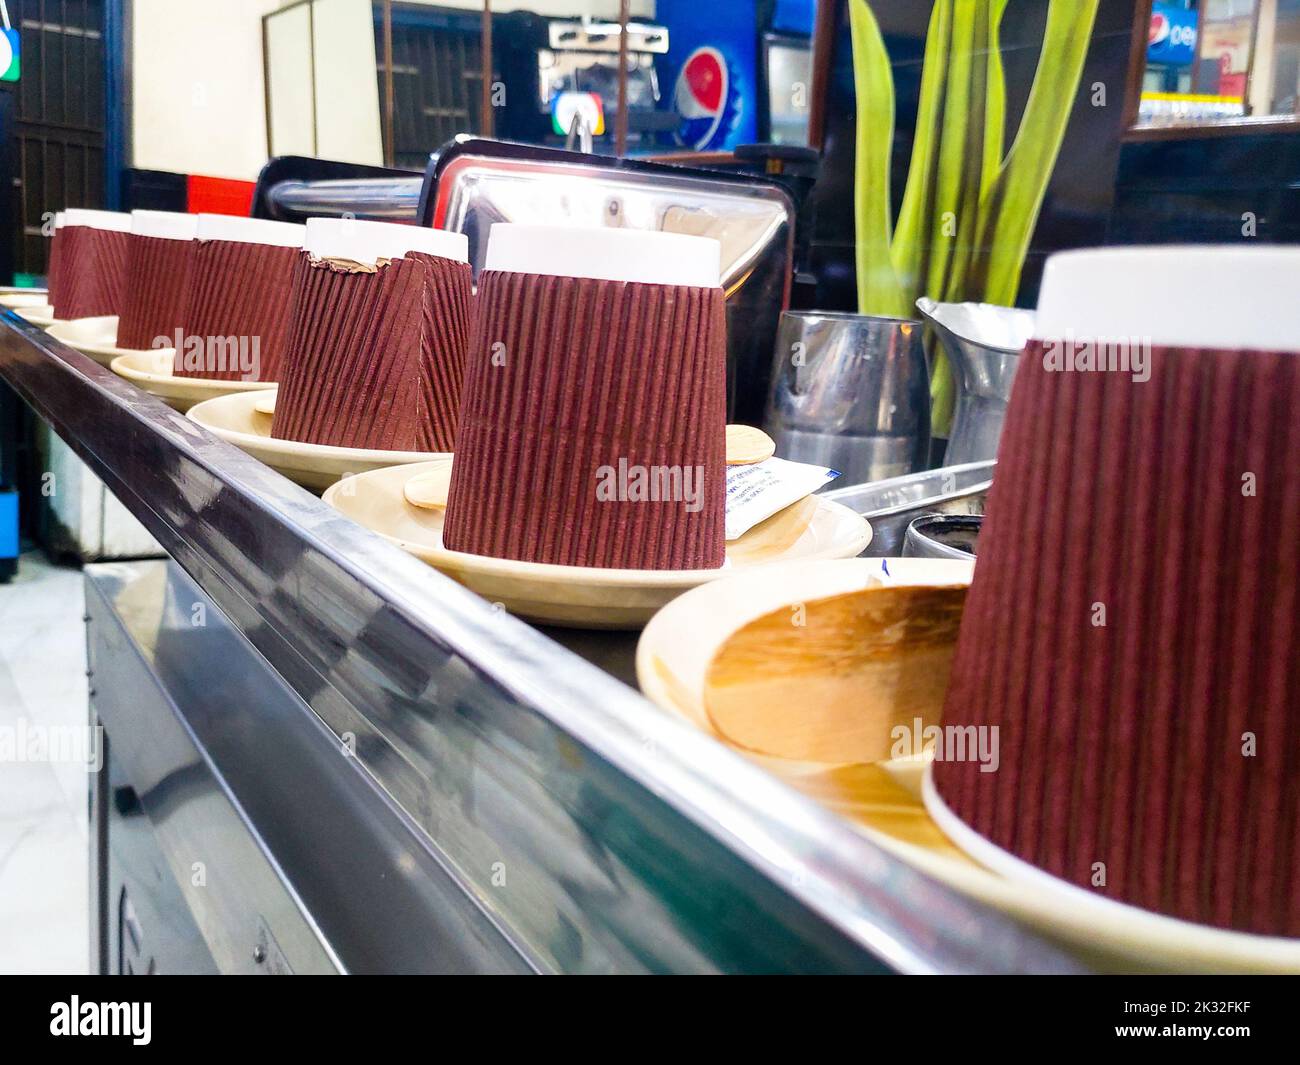 December 8th 2020. Uttarakhand India. Organic disposable paper cups and plates on counter top in a restaurant. Stock Photo